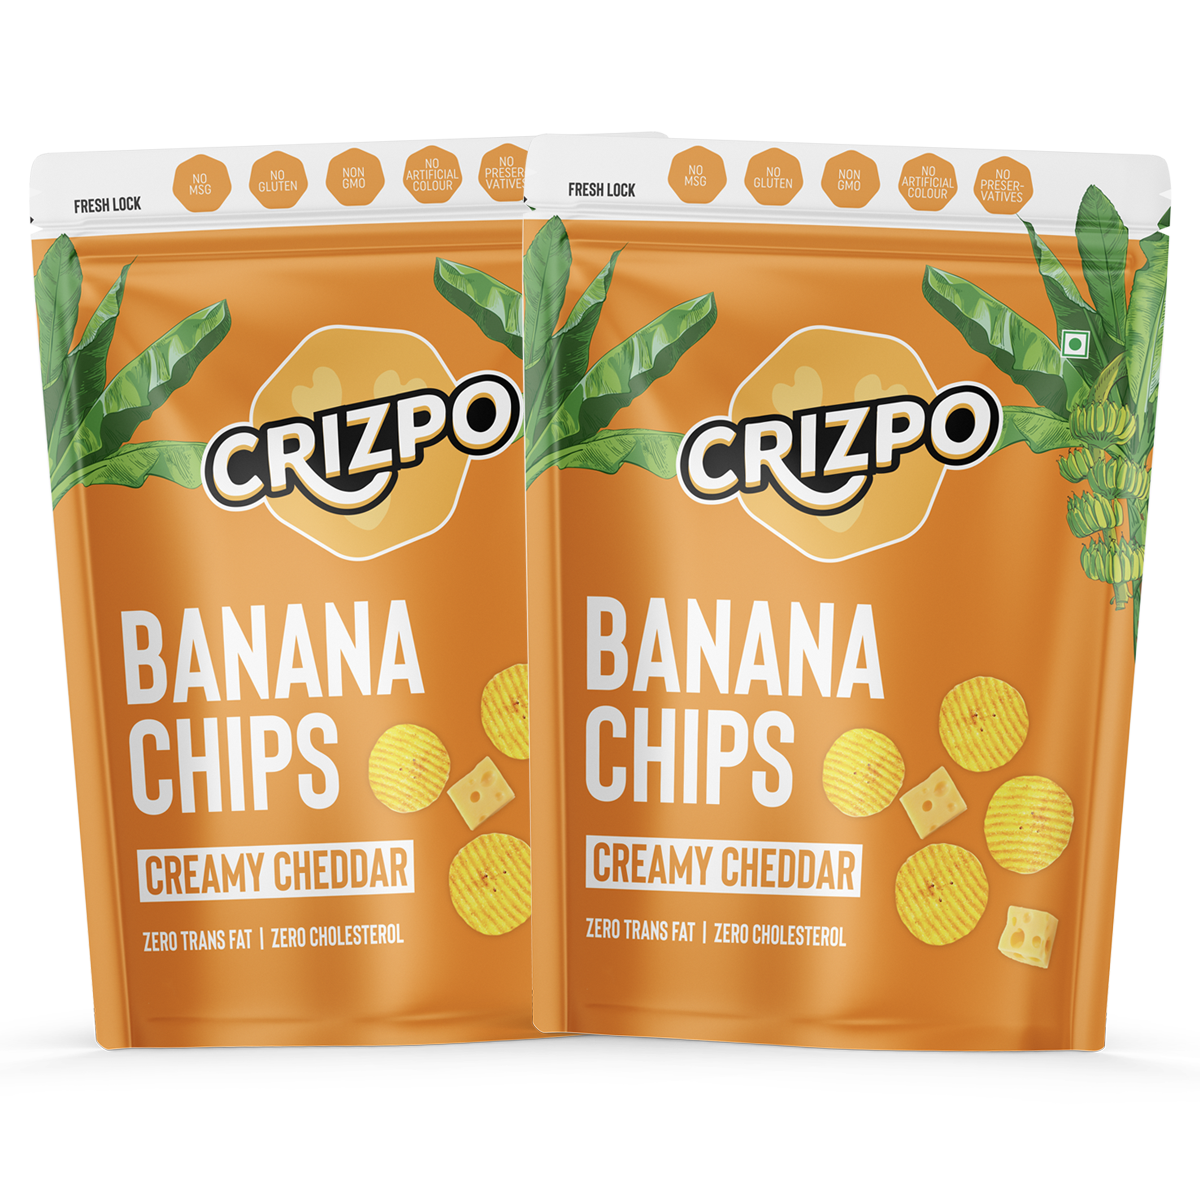 Crizpo Banana Chips - Creamy Cheddar - Pack of 2 x 110g